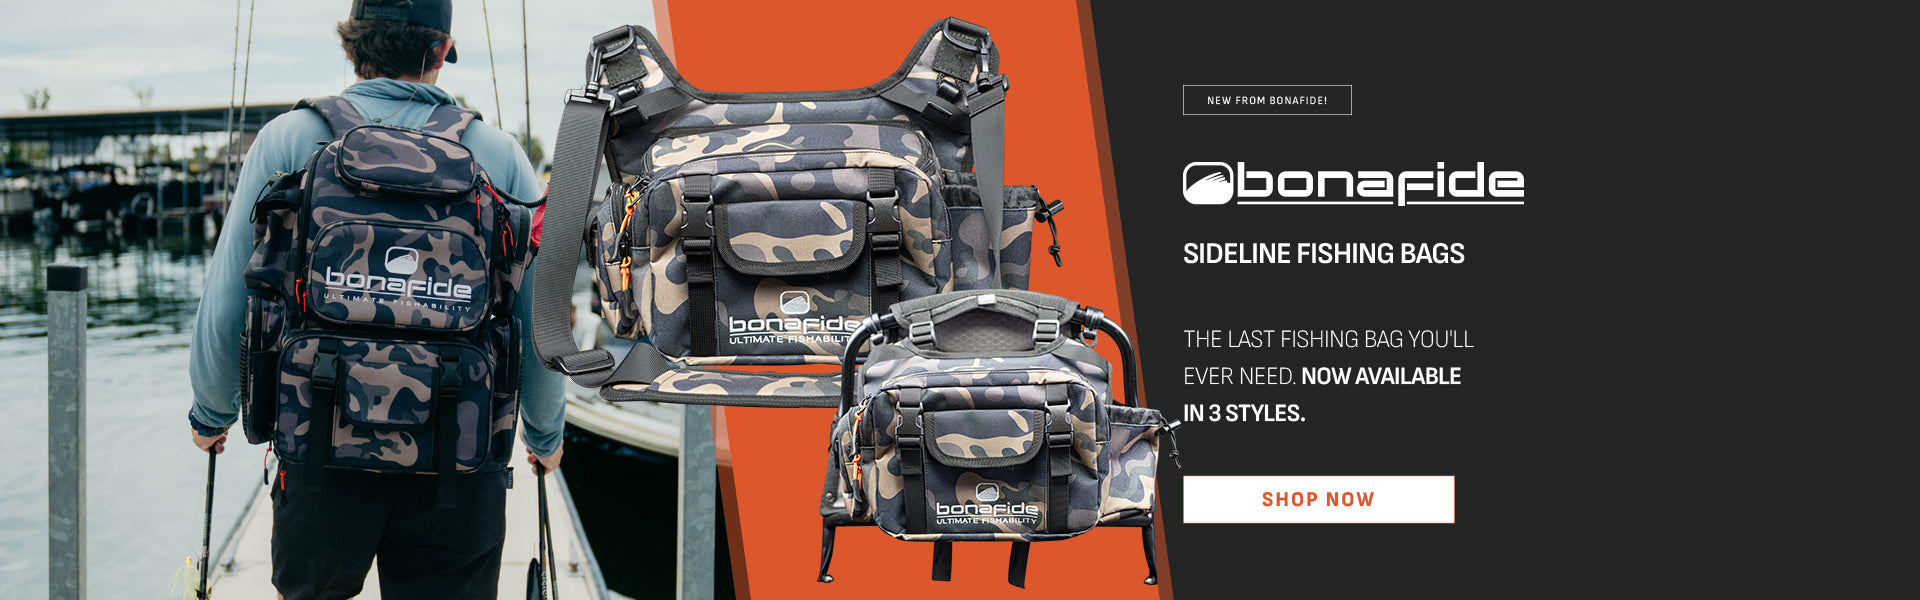 New From Bonafide®! The Bonafide Sideline Fishing Bags: The Last Fishing Bag You'll Ever Need. Now Available in 3 Styles. Shop Now